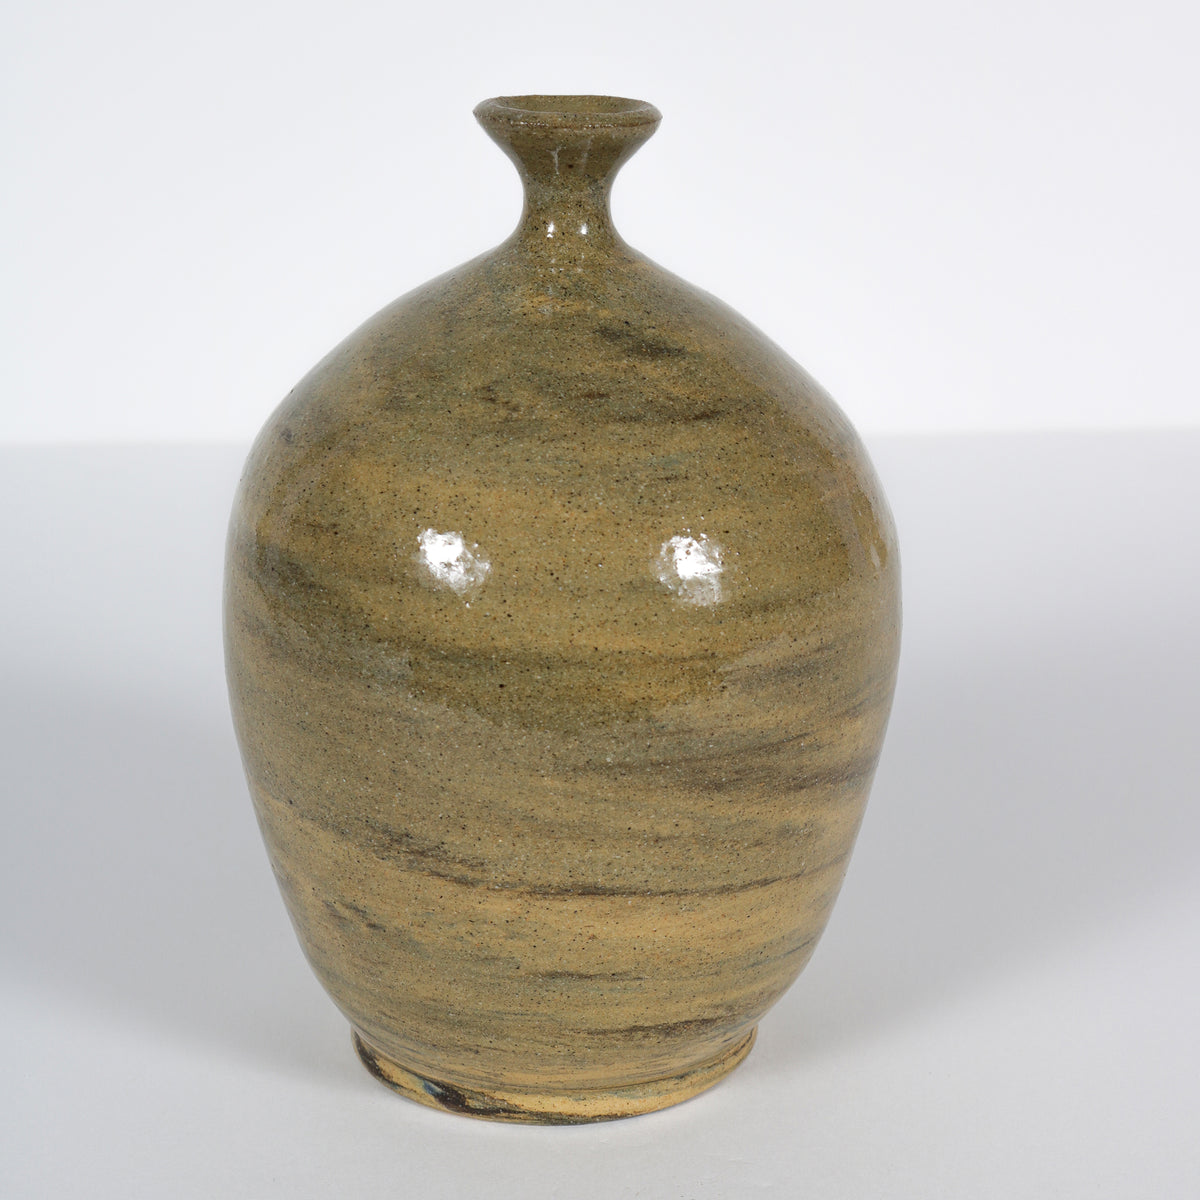 Sandy-Colored Ceramic with Swirled Finish, 1994 &lt;br&gt;&lt;br&gt;#B6038